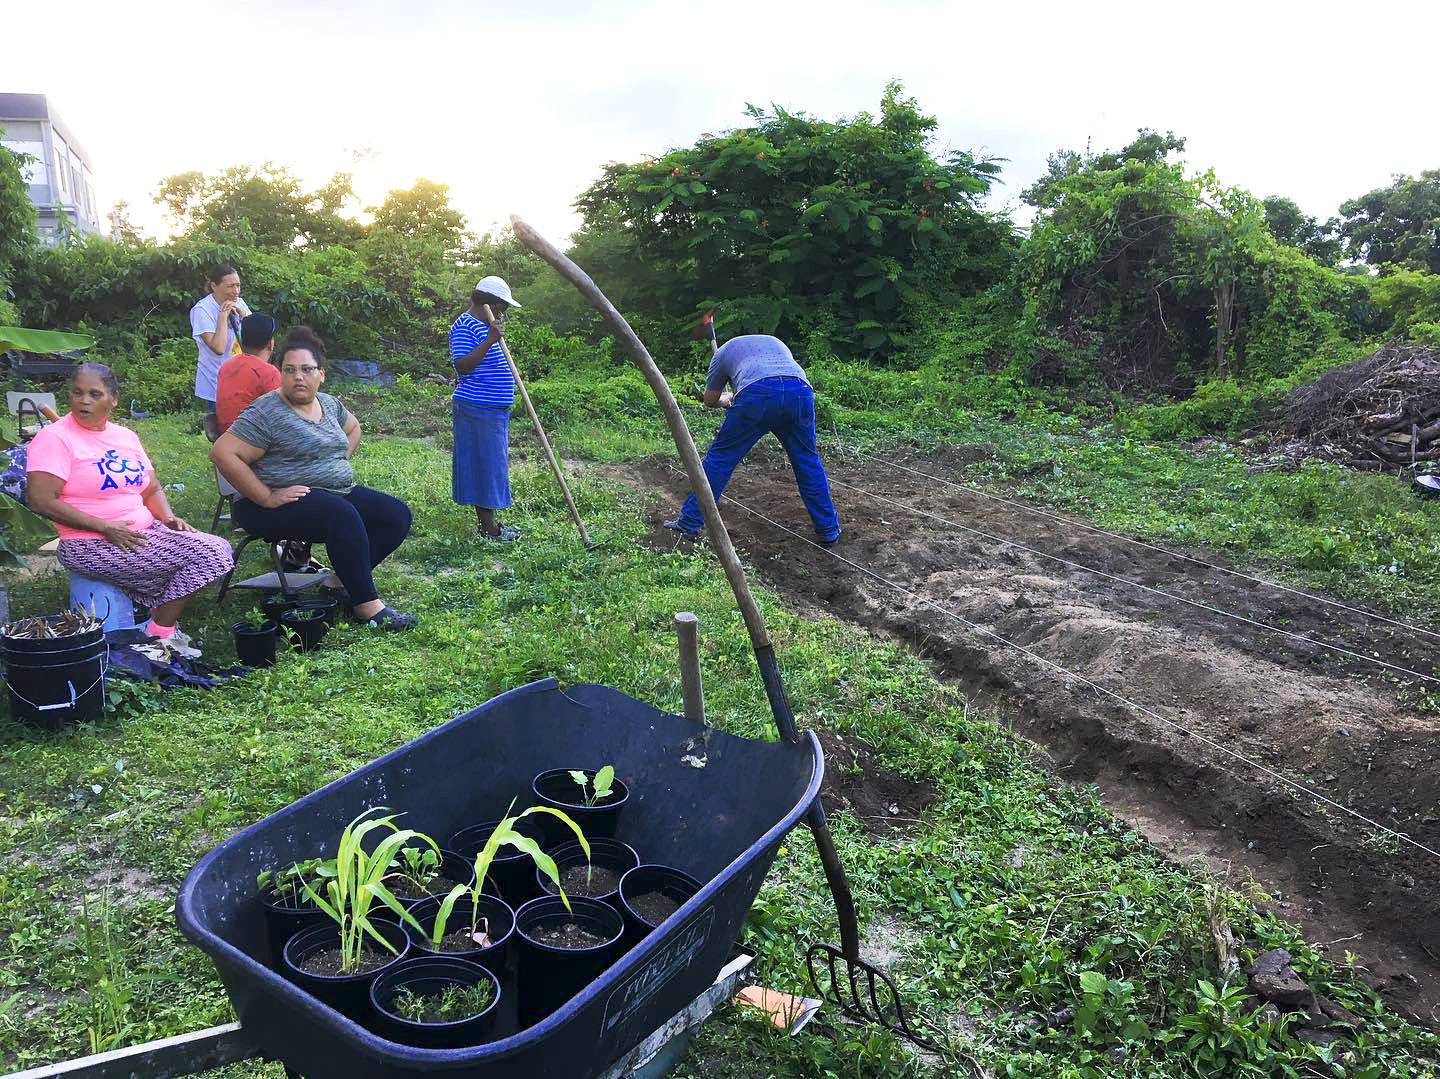 Several people are in a green agricultural field, with several rows of soil turned up and a blue wheelbarrow in the foreground.